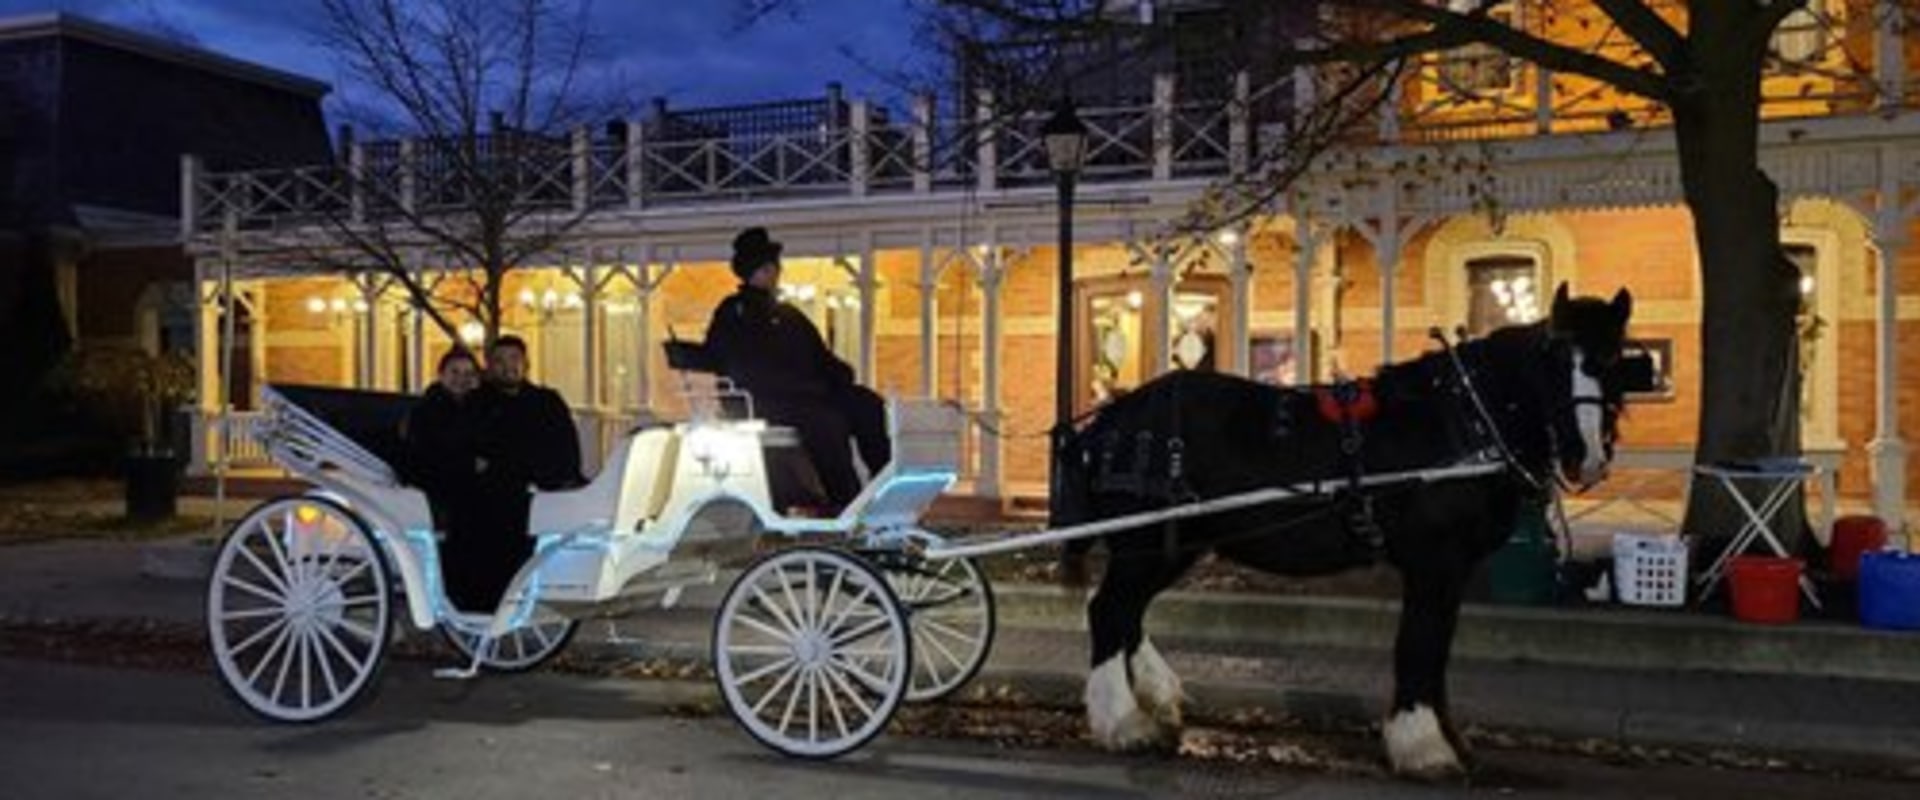 How to Experience a Romantic Carriage Ride in Your City